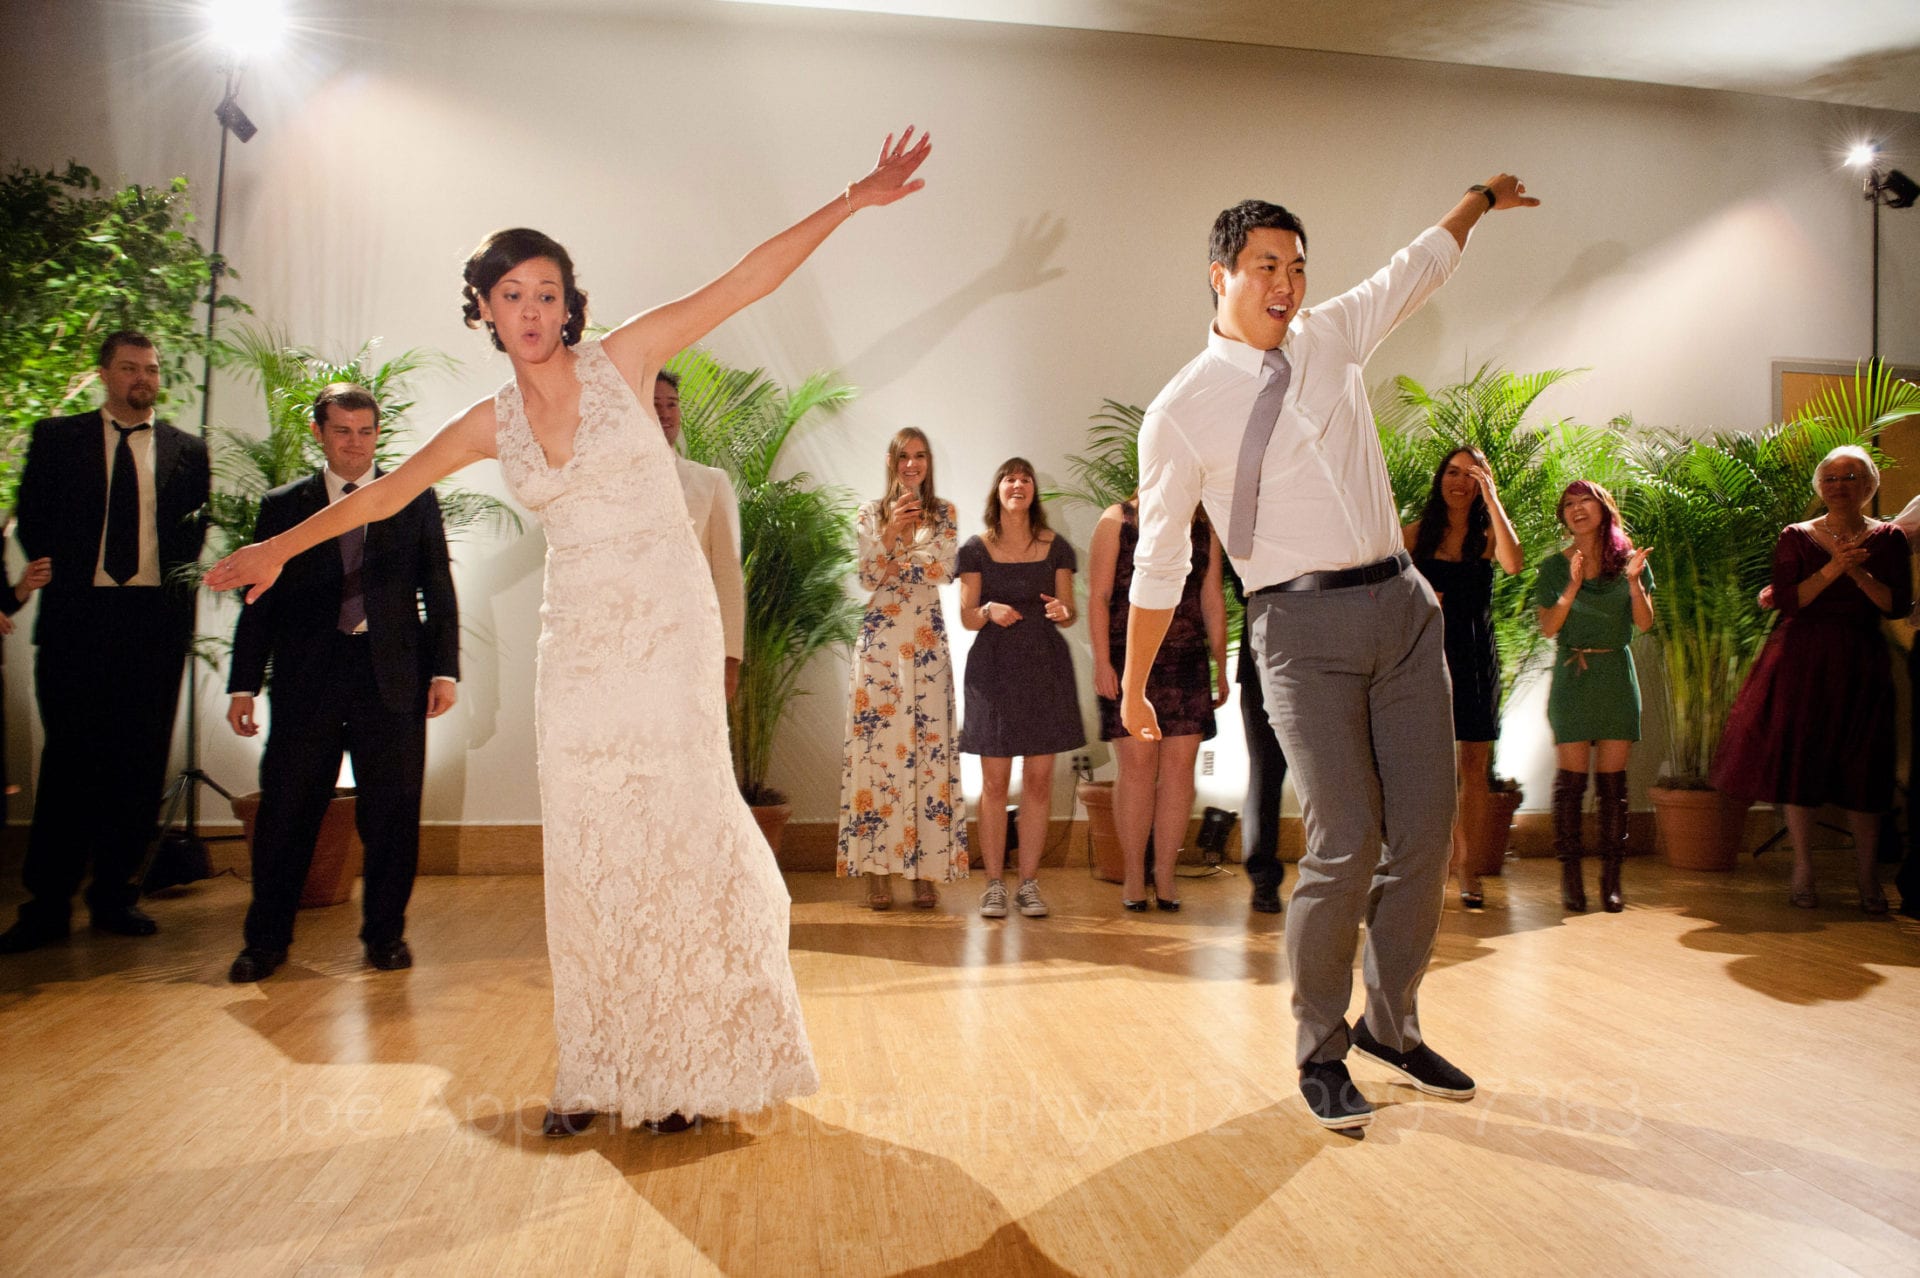 guests watch a bride and groom dance together Phipps Conservatory Weddings